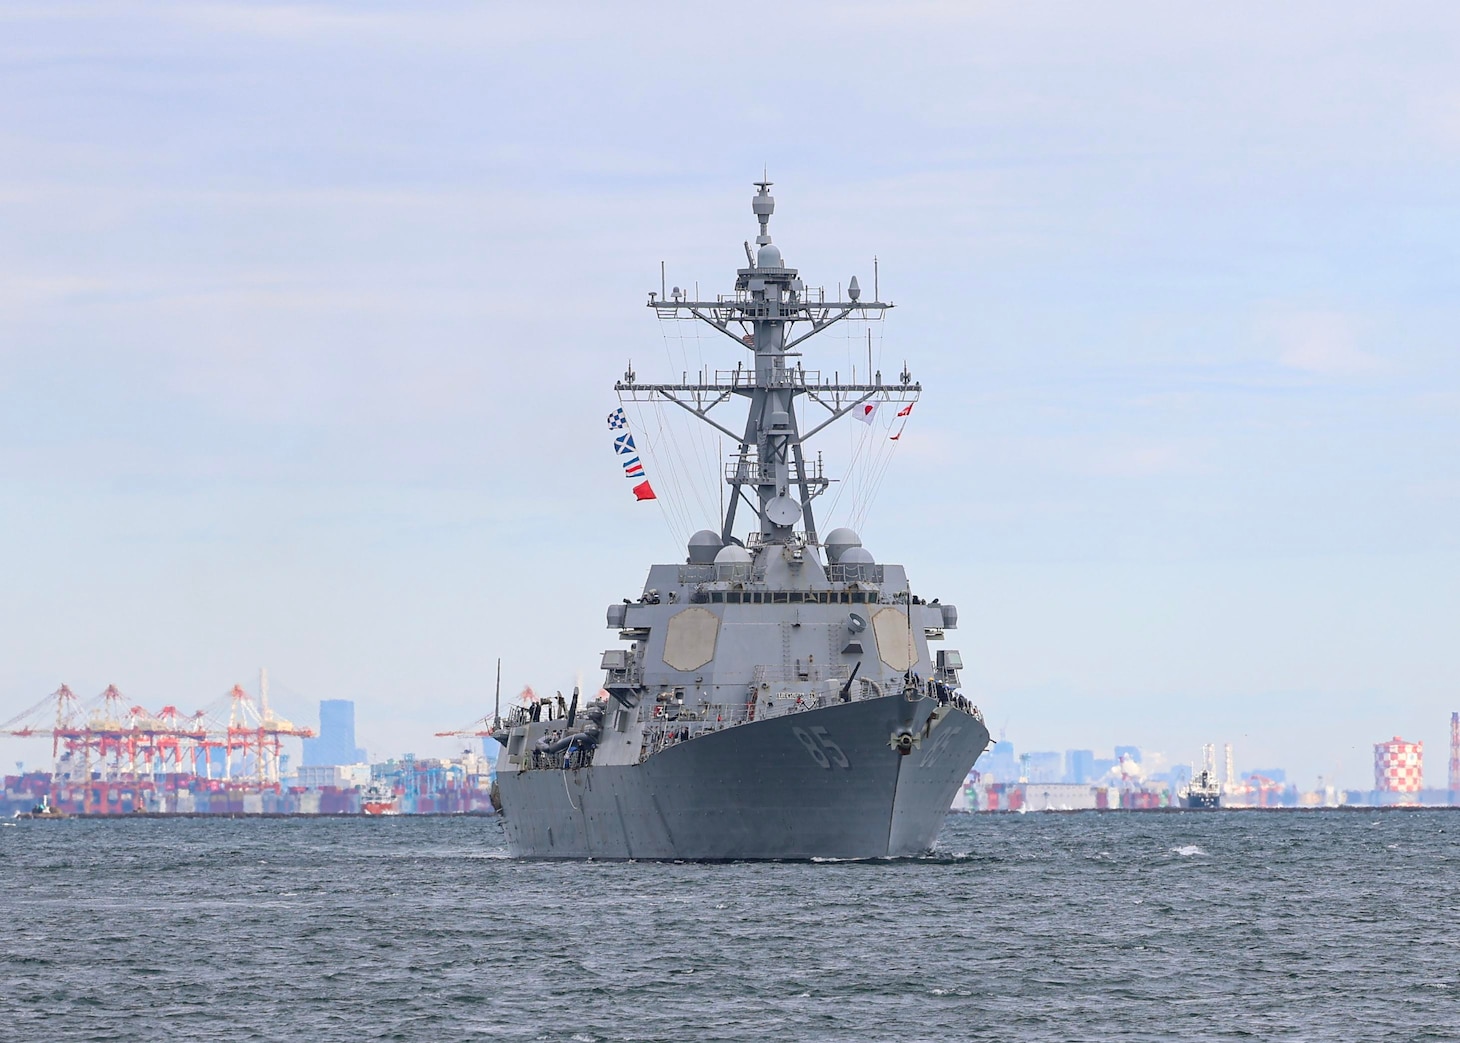 YOKOSUKA, Japan (March 2, 2024) – The Arleigh Burke-class guided-missile destroyer USS McCampbell (DDG 85) returns to Commander, Fleet Activities Yokosuka, March 2, after a 17-month Depot Modernization Period in Portland, Oregon. McCampbell is forward-deployed and assigned to Destroyer Squadron (DESRON) 15, the Navy’s largest DESRON and the U.S. 7th Fleet’s principal surface force. (U.S. Navy photo by Mass Communication Specialist 1st Class Greg Johnson)